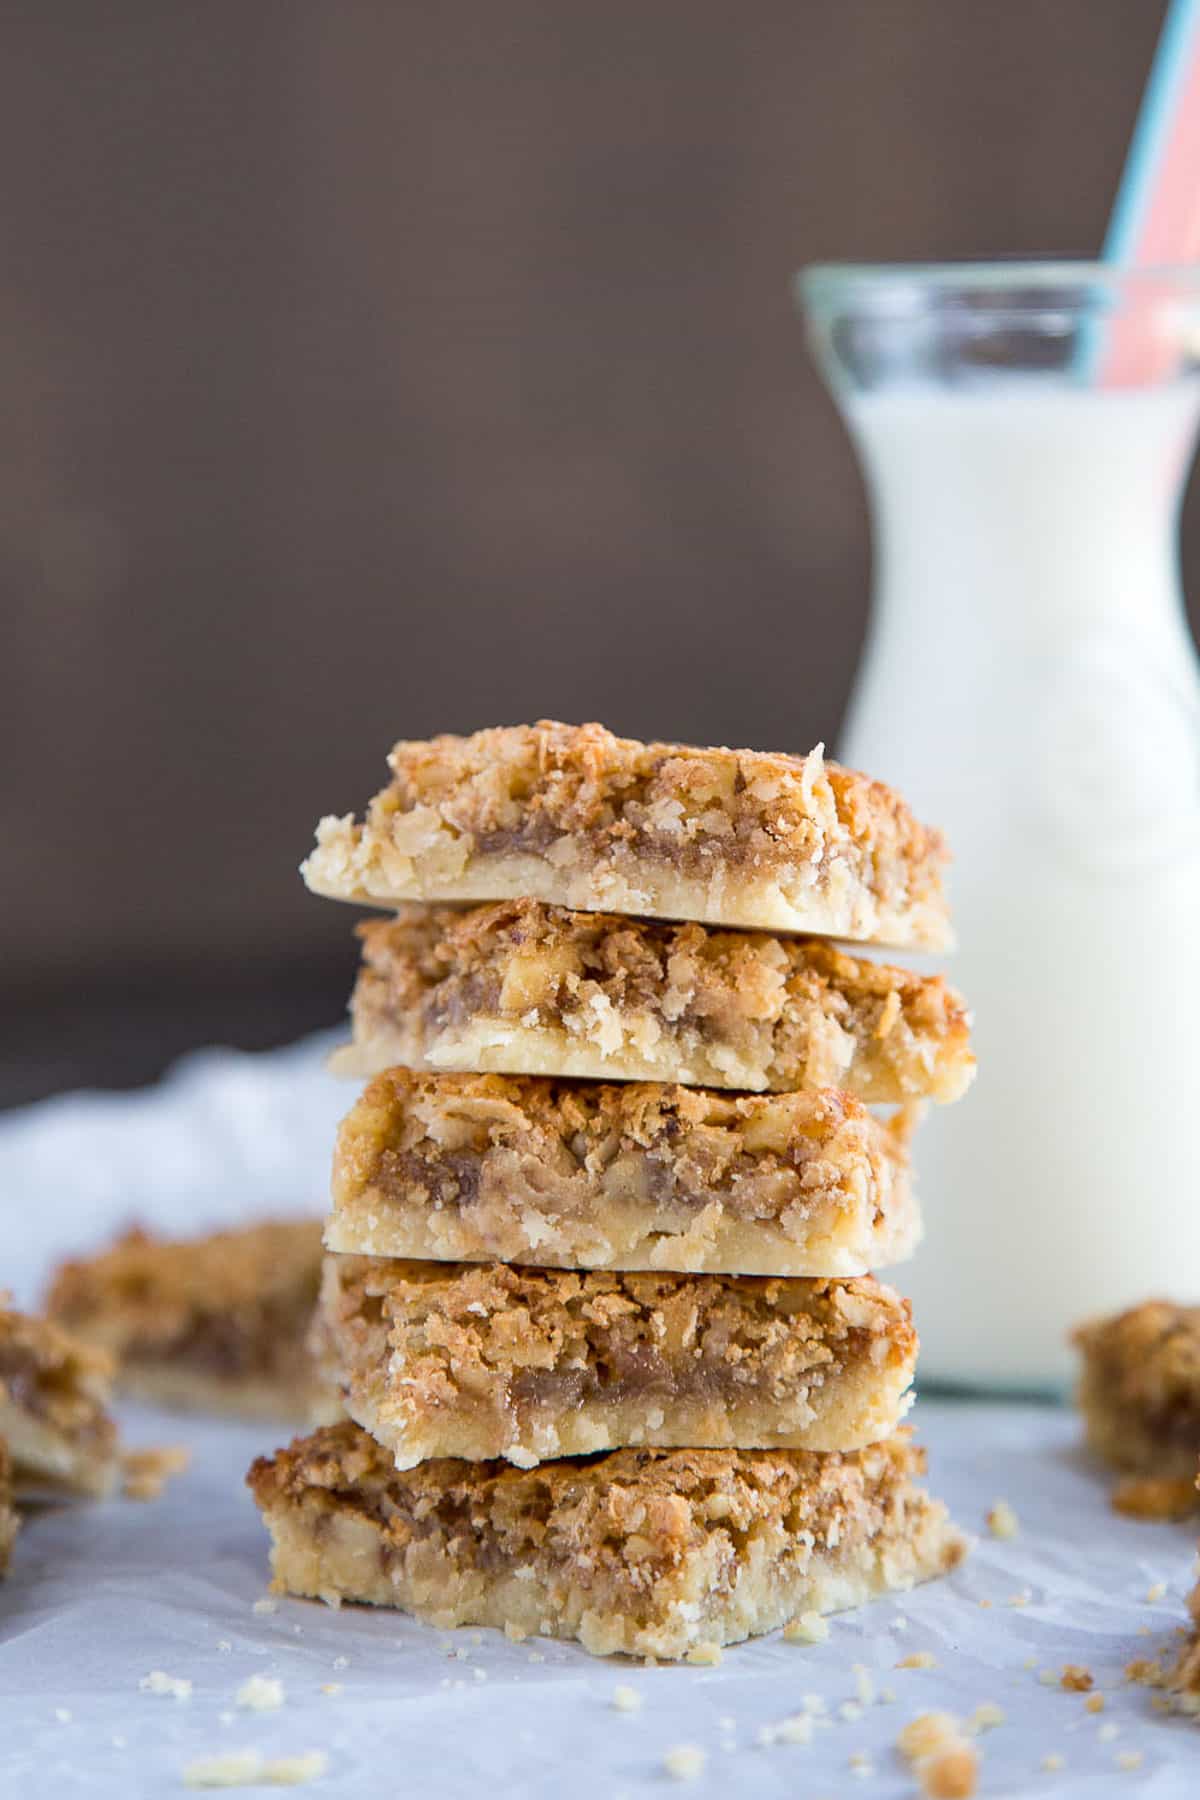 five chewy coconut bar cookies stacked up next to a glass of milk with a pink straw.